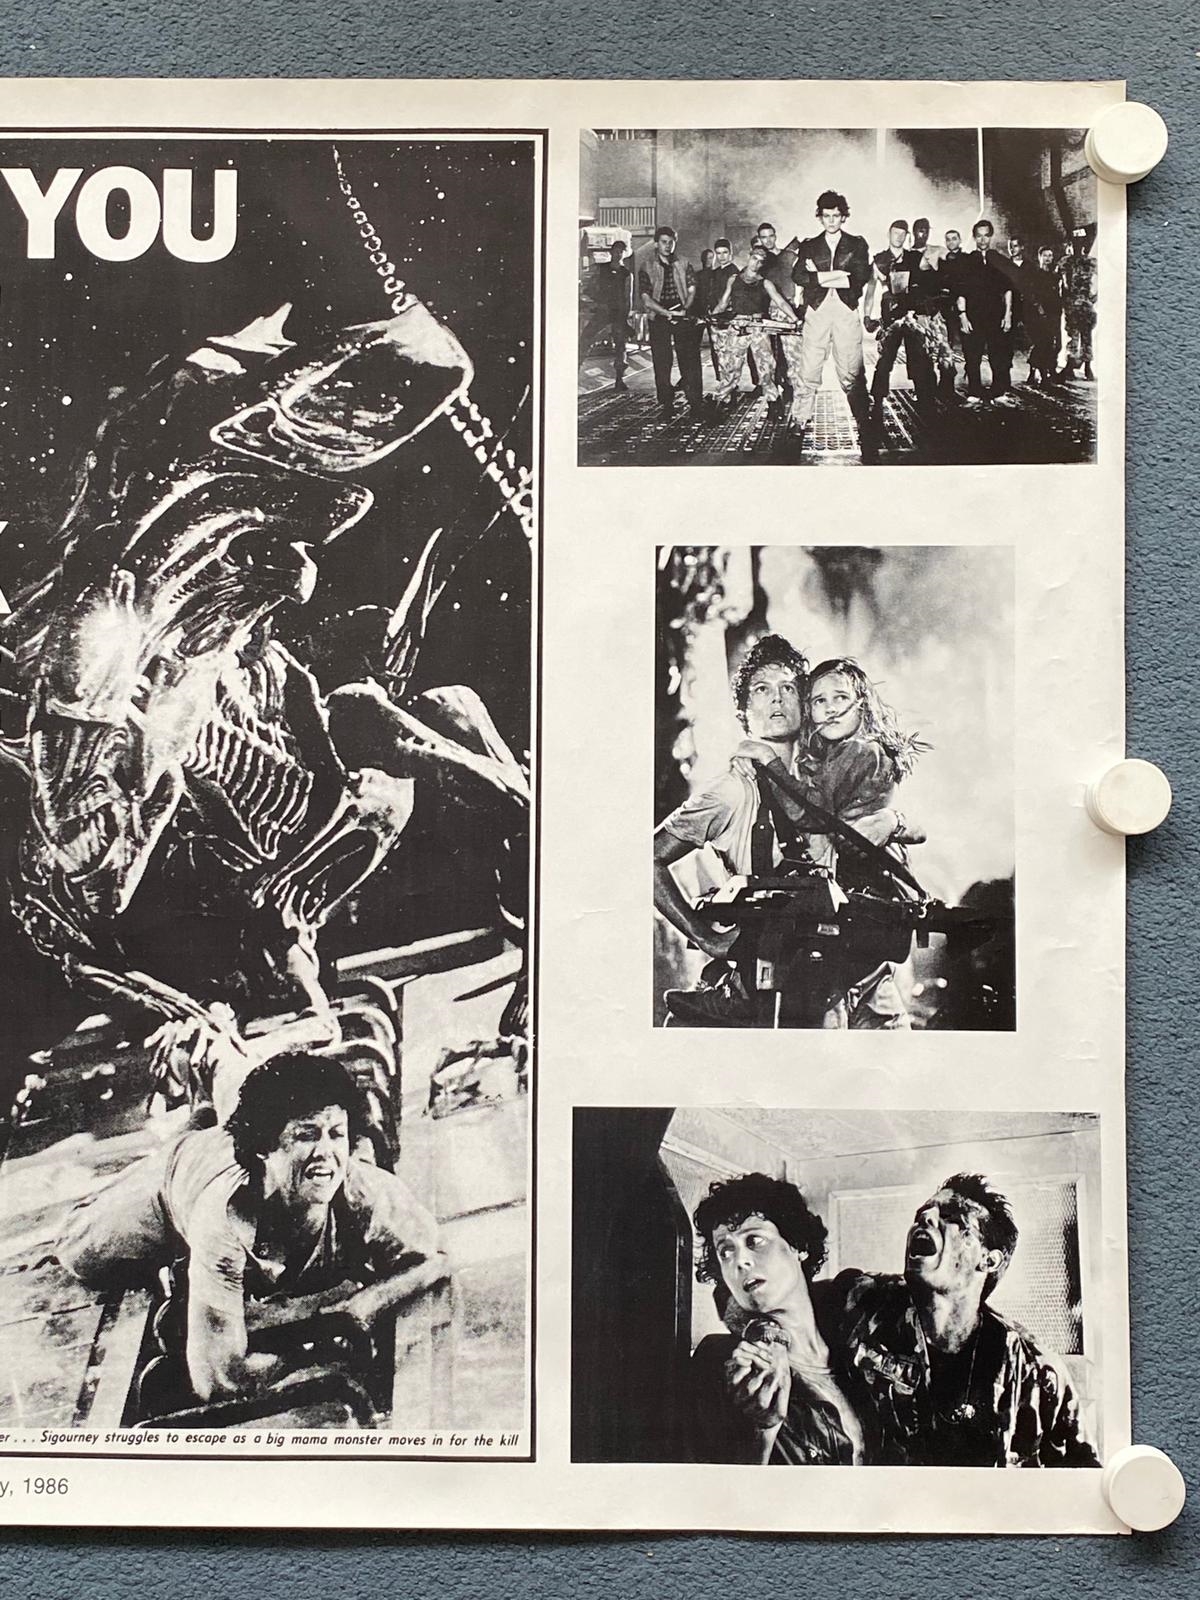 ALIENS (1986) - British UK Quad - 'Newspaper' style artwork - - Rolled (as issued) - Image 3 of 4